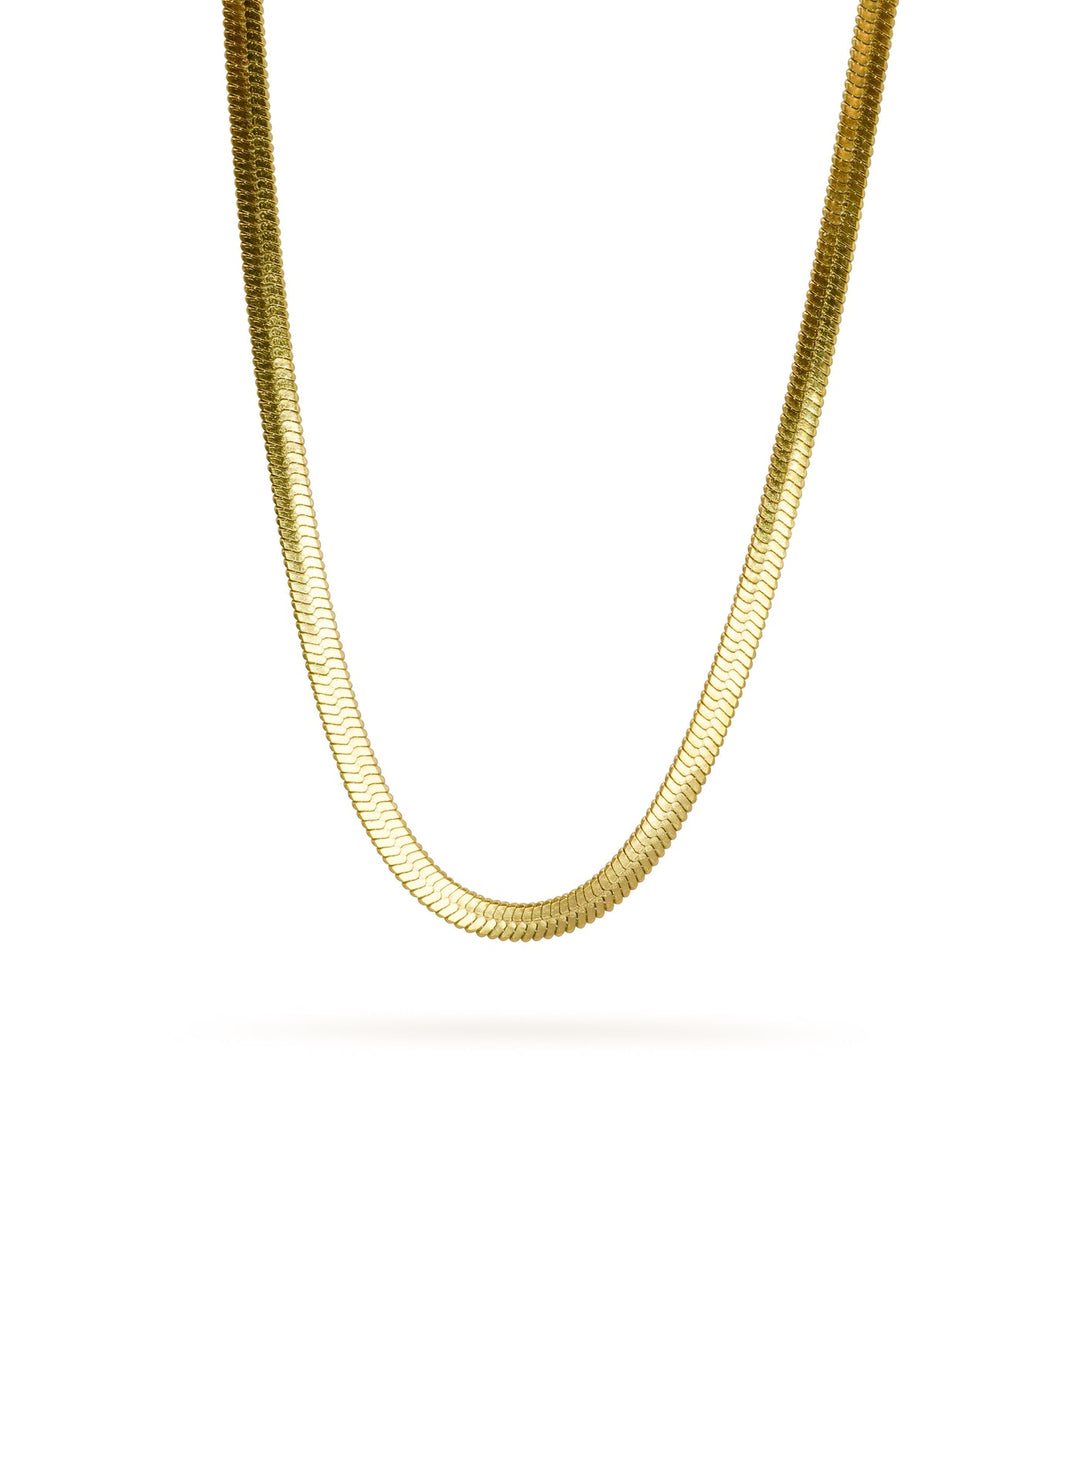 Lily Necklace - 18kt Gold Plated 16"